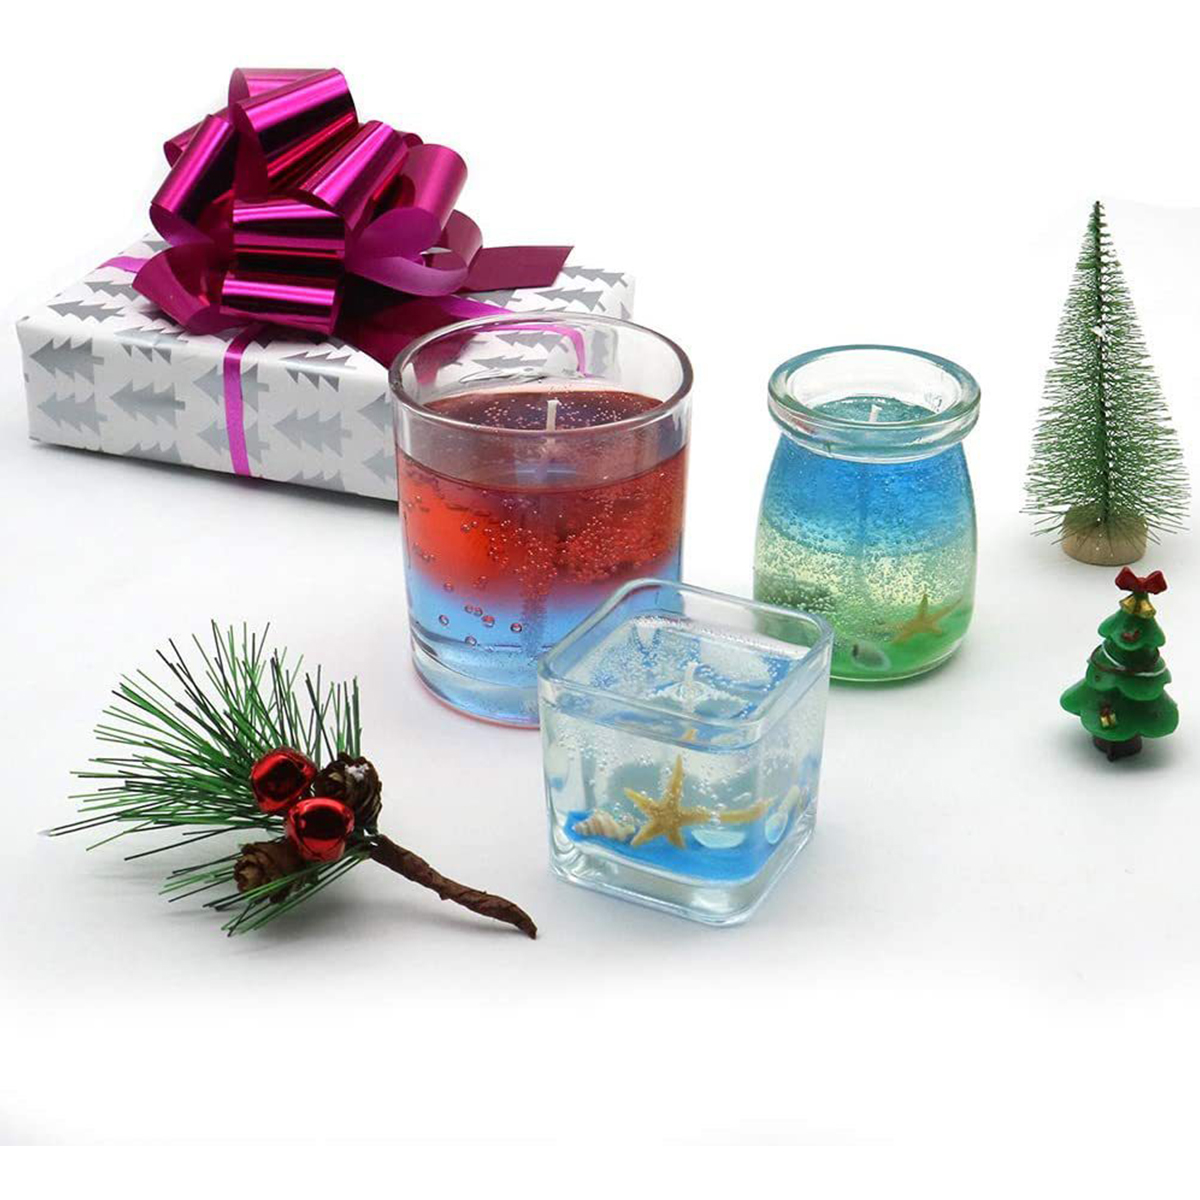 1PCS-DIY-Candle-Material-Kit-Aromatherapy-Jelly-Candle-Parent-child-Romantic-Christmas-Diy-Candle-Ha-1899594-11